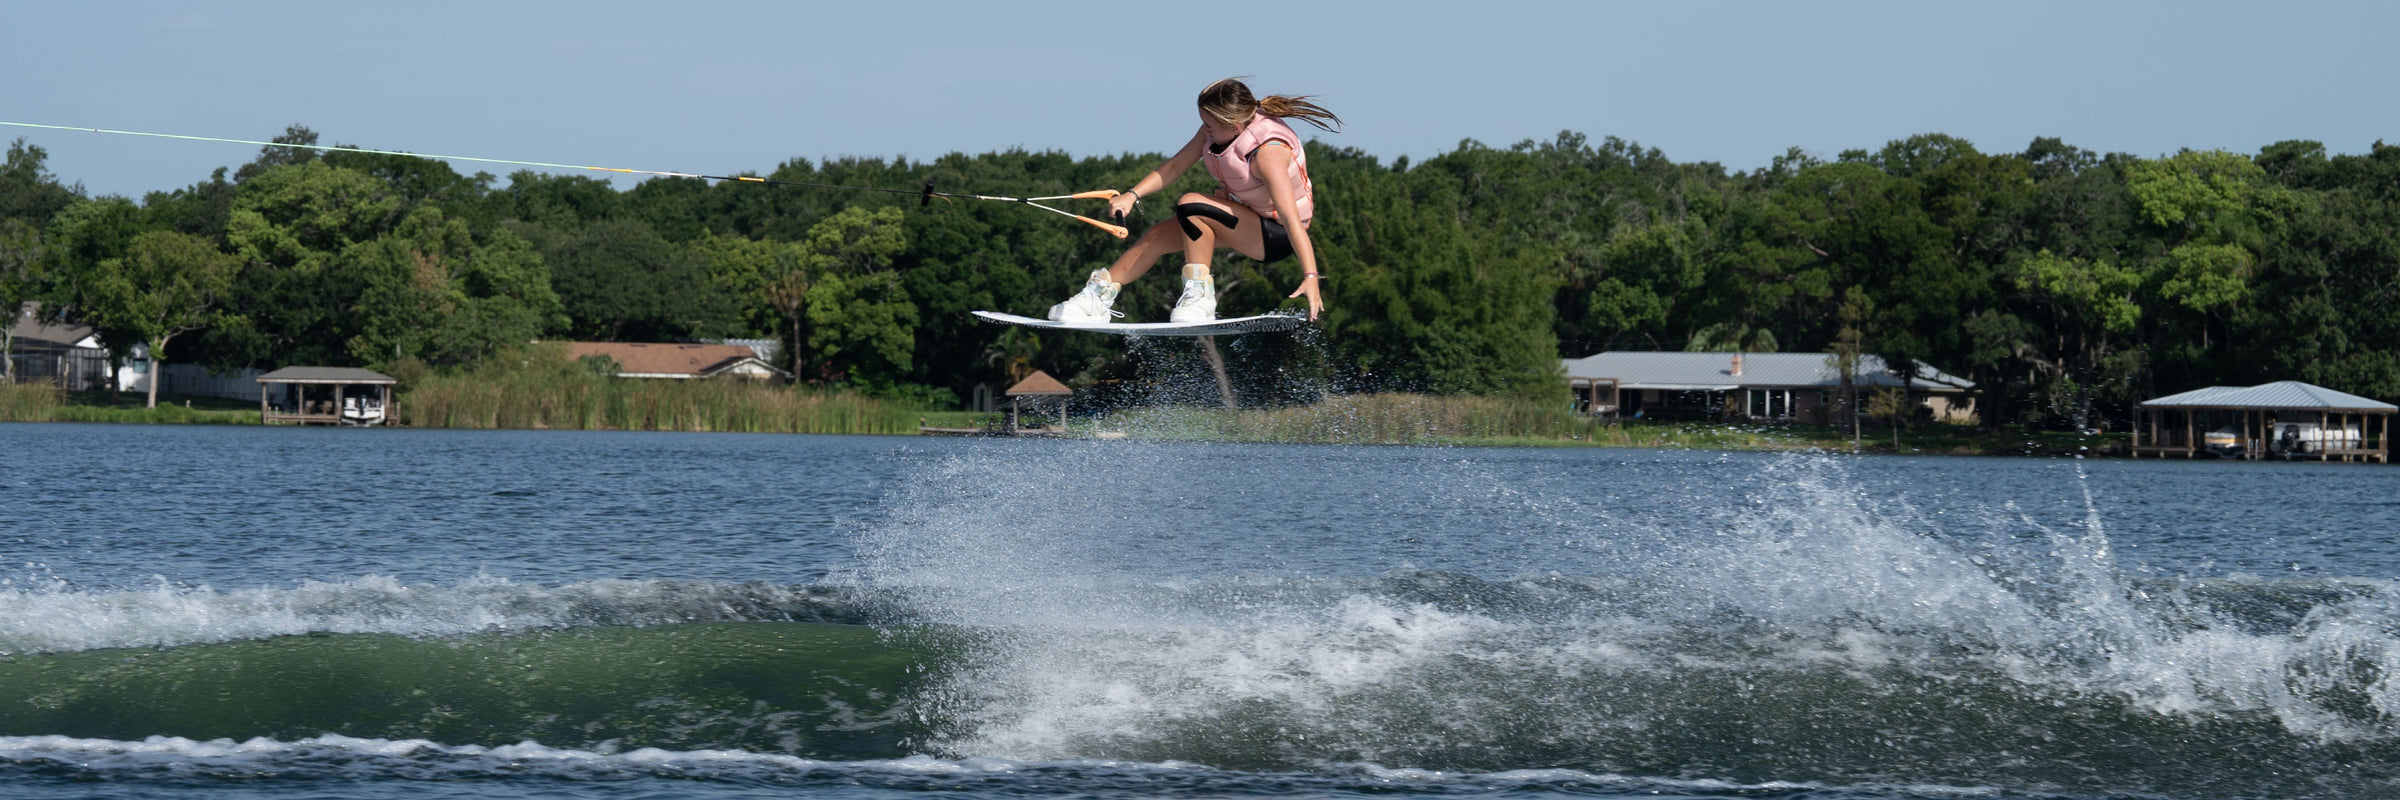 Jetpilot Team Rider Wakeboarding whit the Womae's Armada Vest 